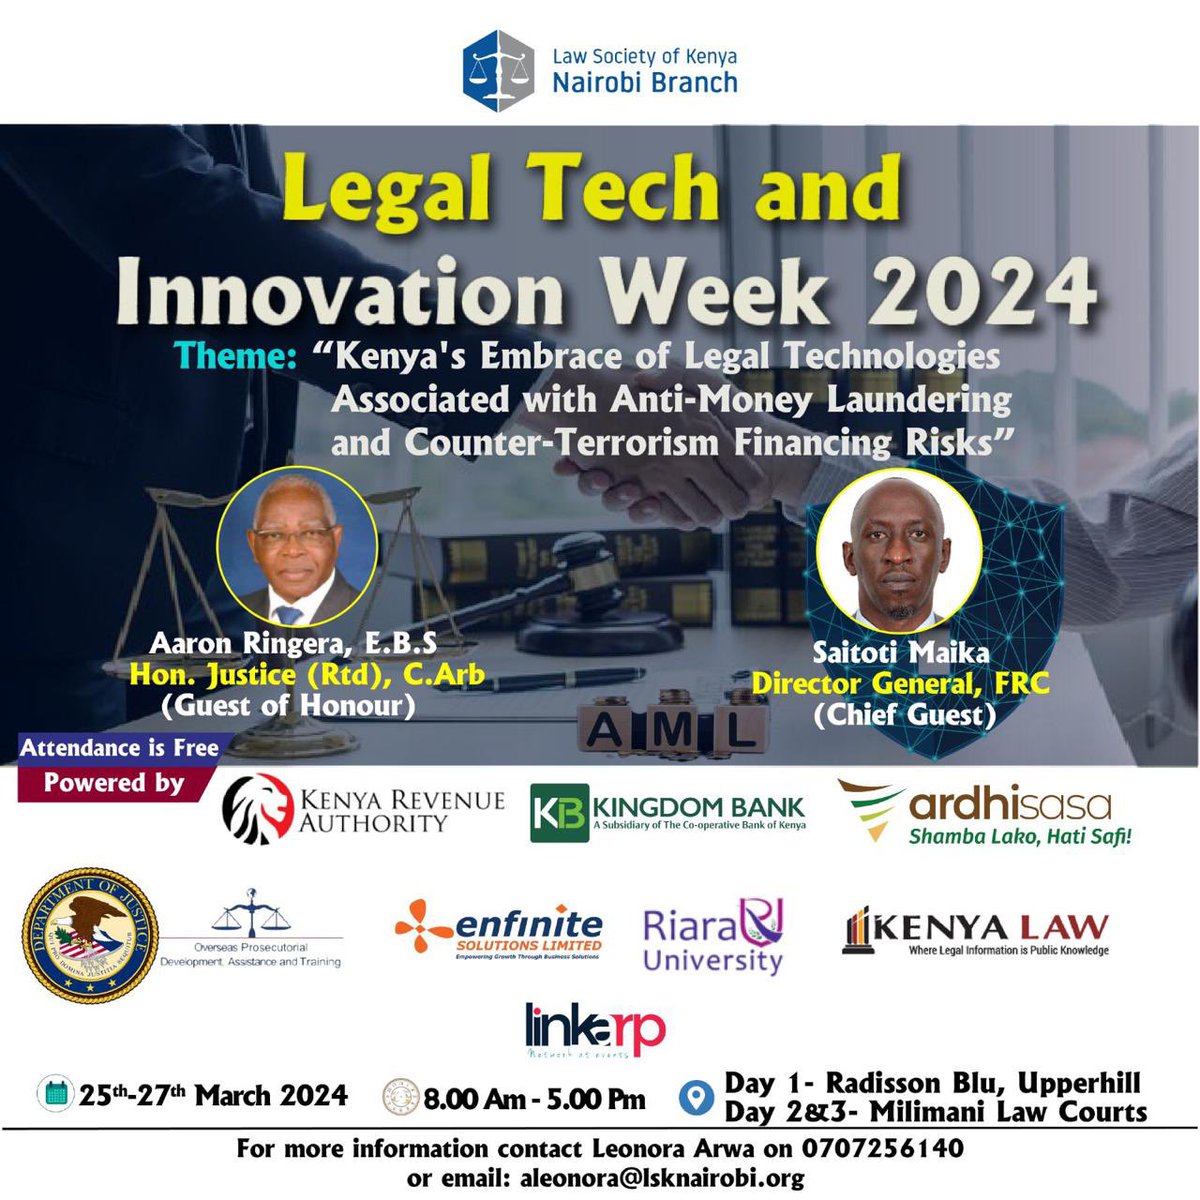 Making Networking Easier 🥳 Checkout and join the network of people attending 'Legal Tech and Innovation Week 2024' and make life changing connections. linkarp.com/events/bd3799b…